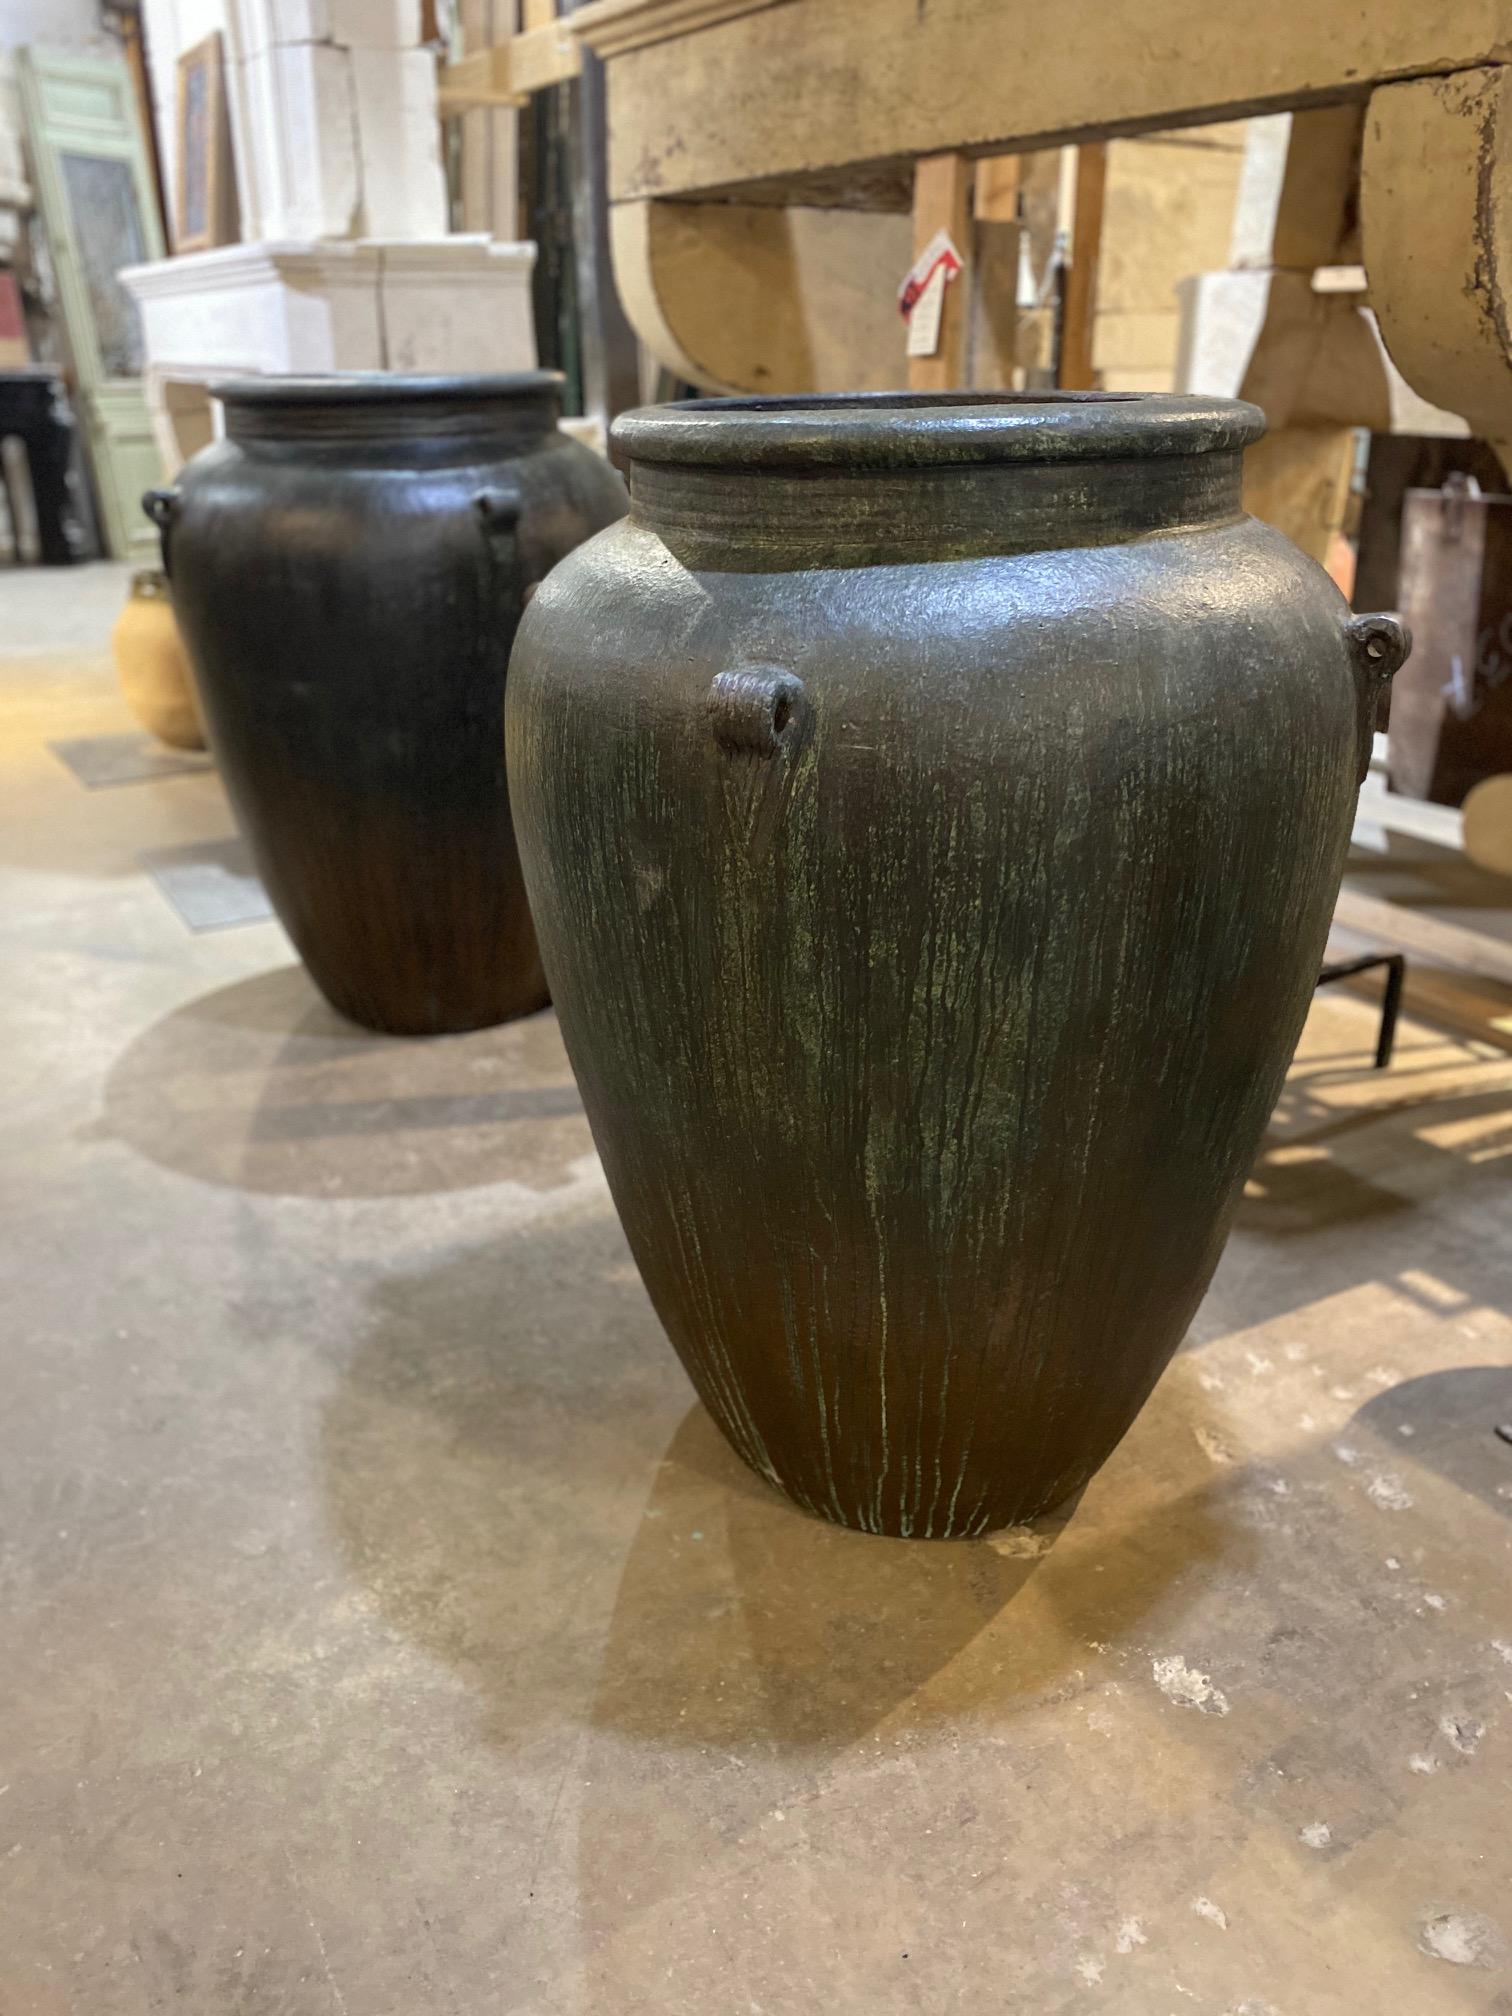 This midcentury vessel is painted in deep blue, bronze, and green for a unique exterior that will turn heads.

Measurements: 33” D x 43” H.